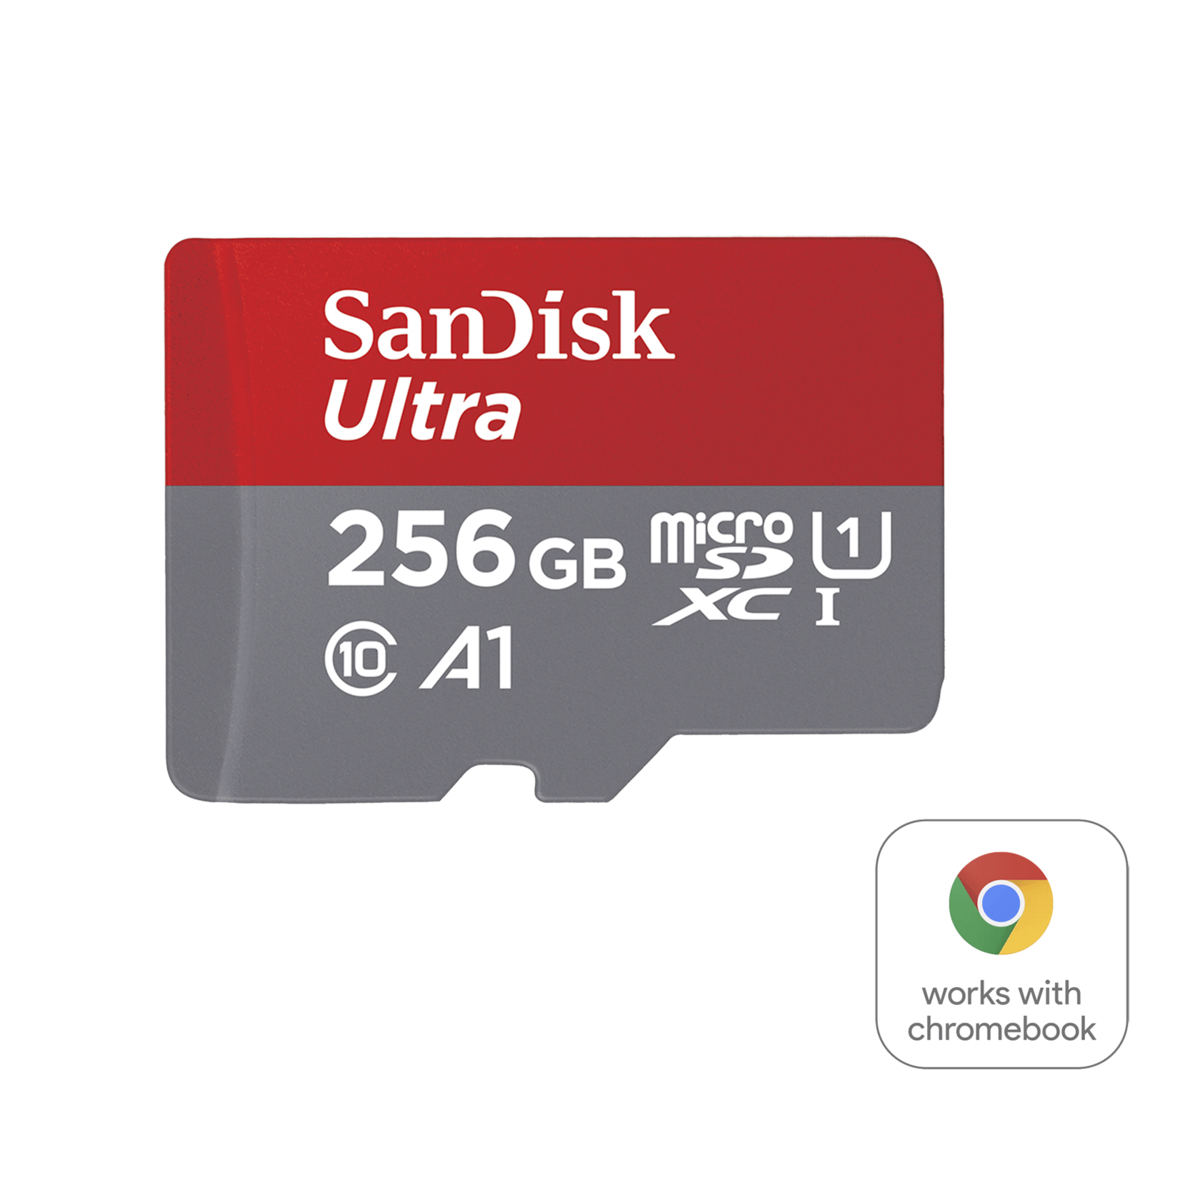 SanDisk 256GB Ultra microSDXC UHS-I Card with Adapter